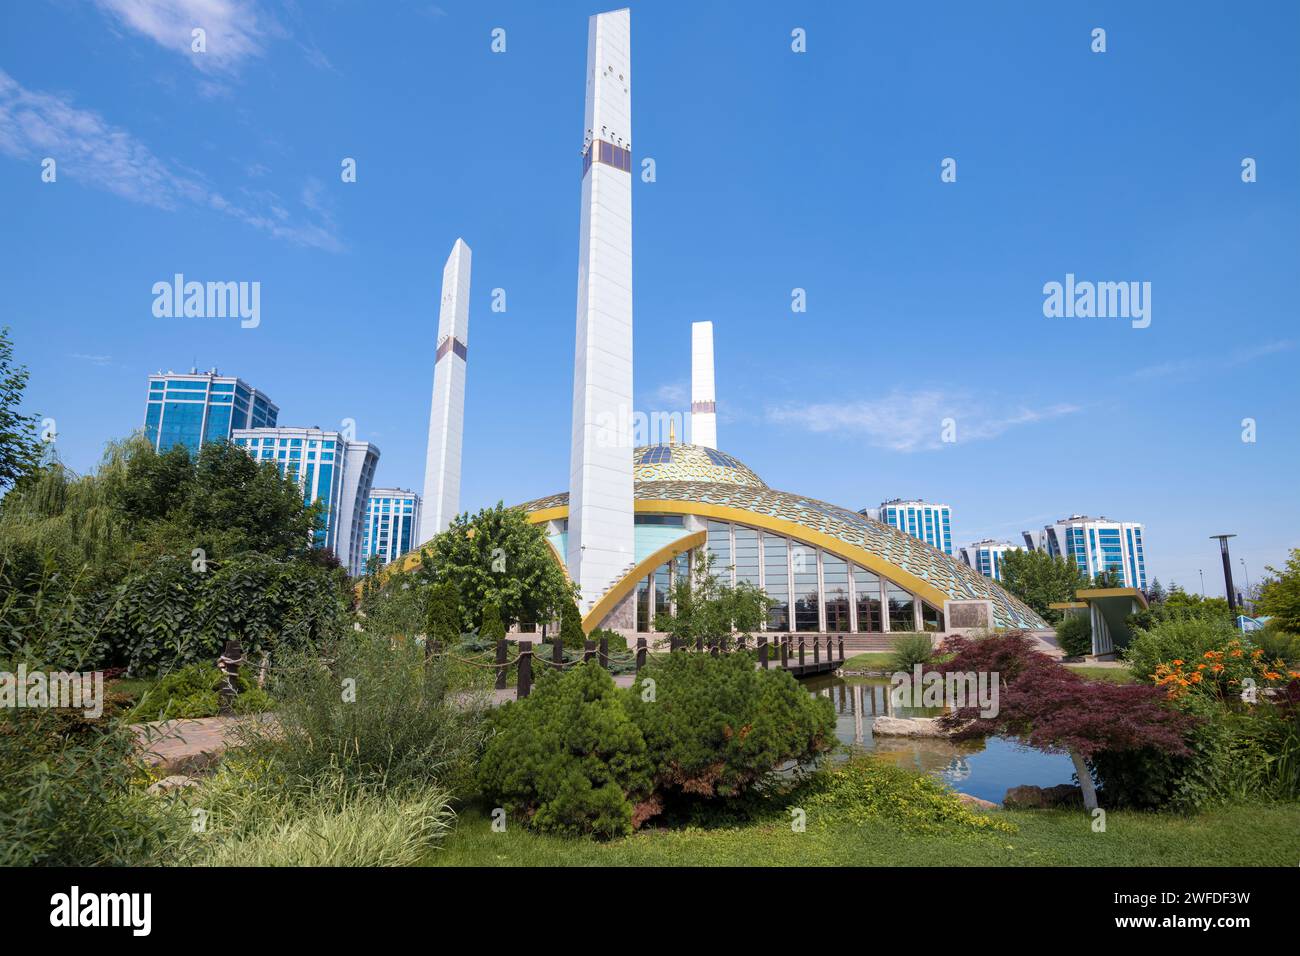 ARGUN, RUSSIA - JUNE 14, 2023: Sunny June day at the Mother's Heart mosque Stock Photo